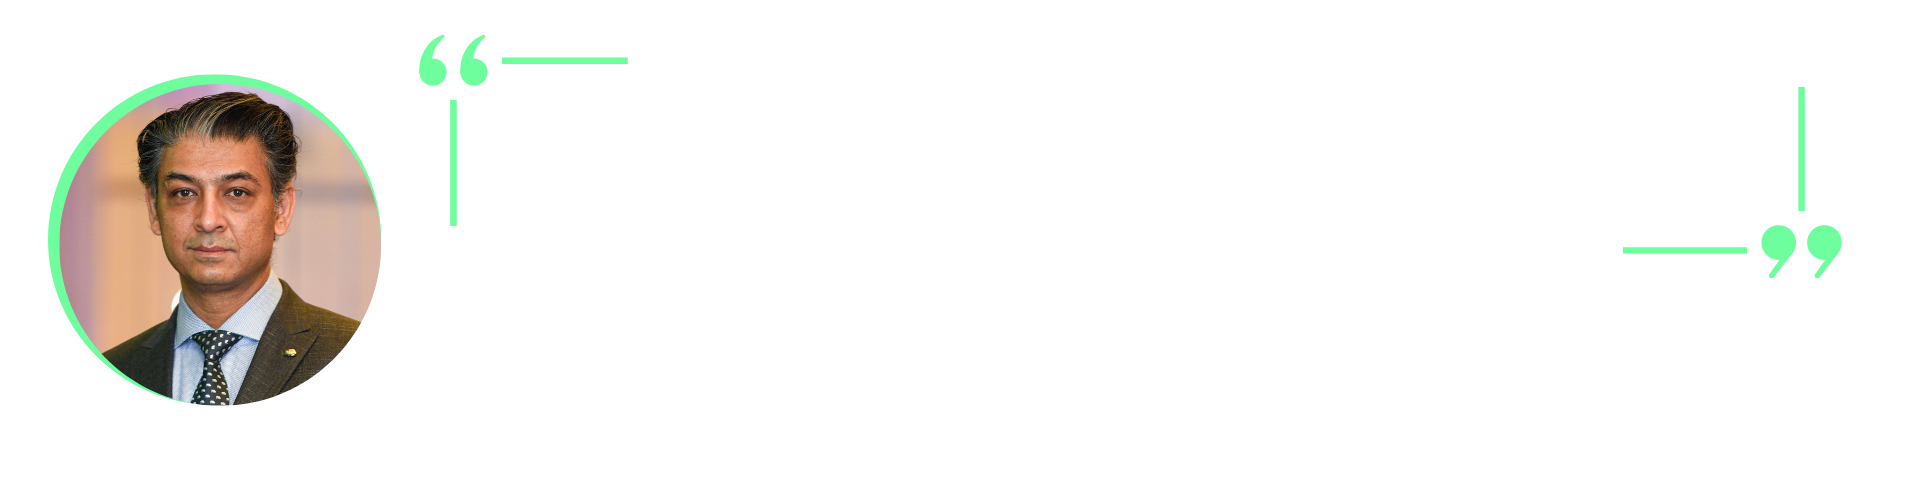 Doctor Adnan Siddiqui's quotation: “When you're putting a balloon up, don't put it up for more than 5 minutes”